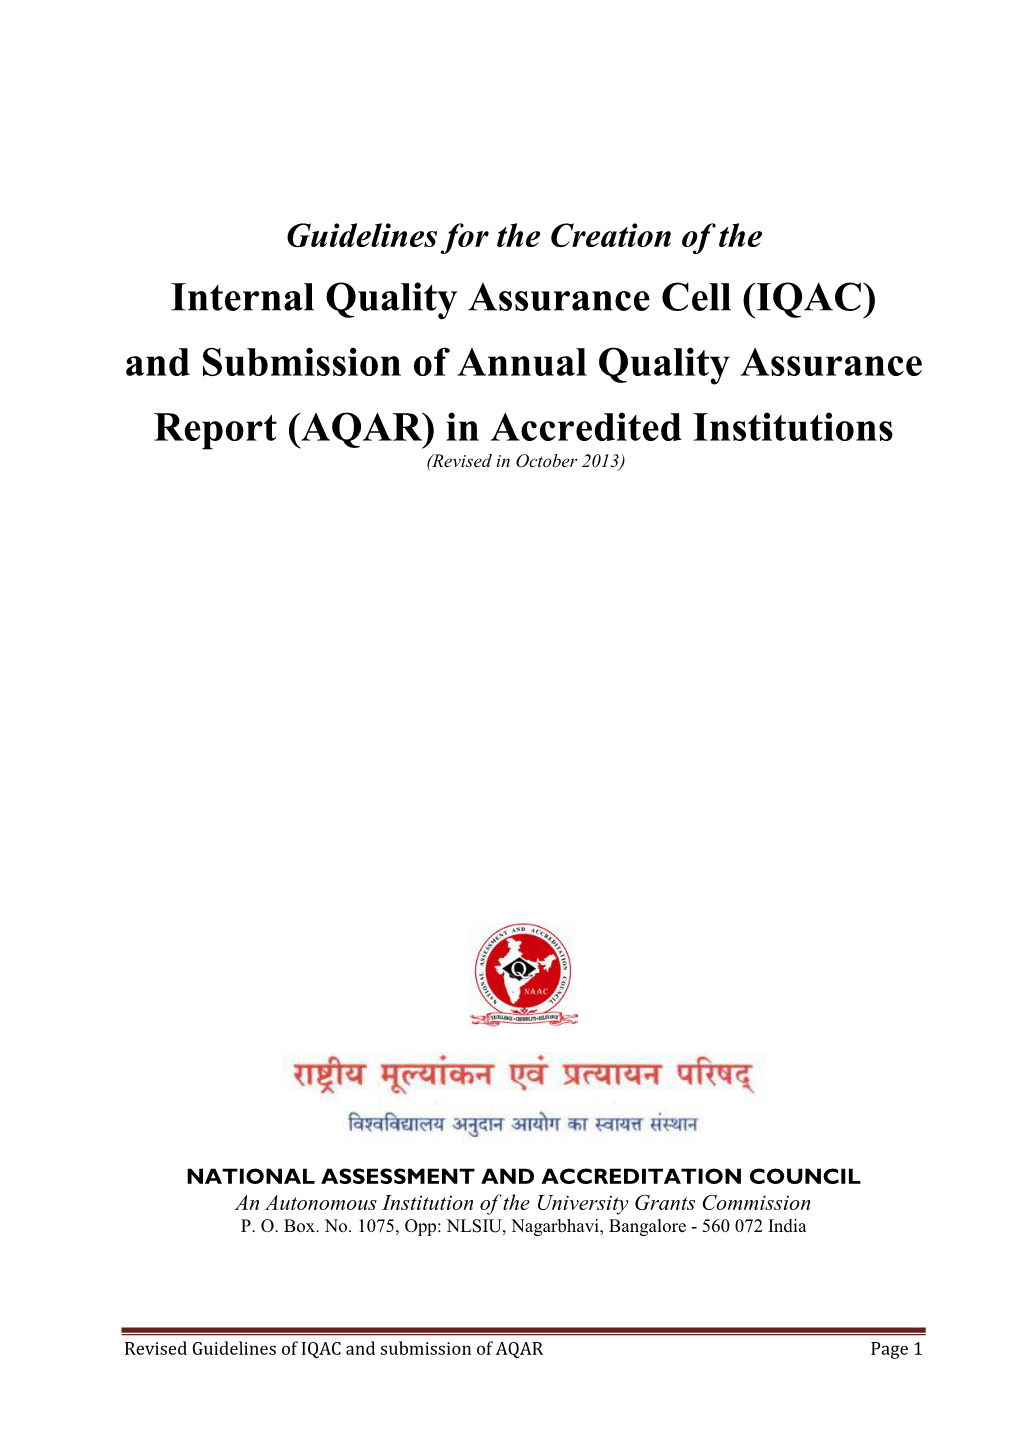 Internal Quality Assurance Cell (IQAC) and Submission of Annual Quality Assurance